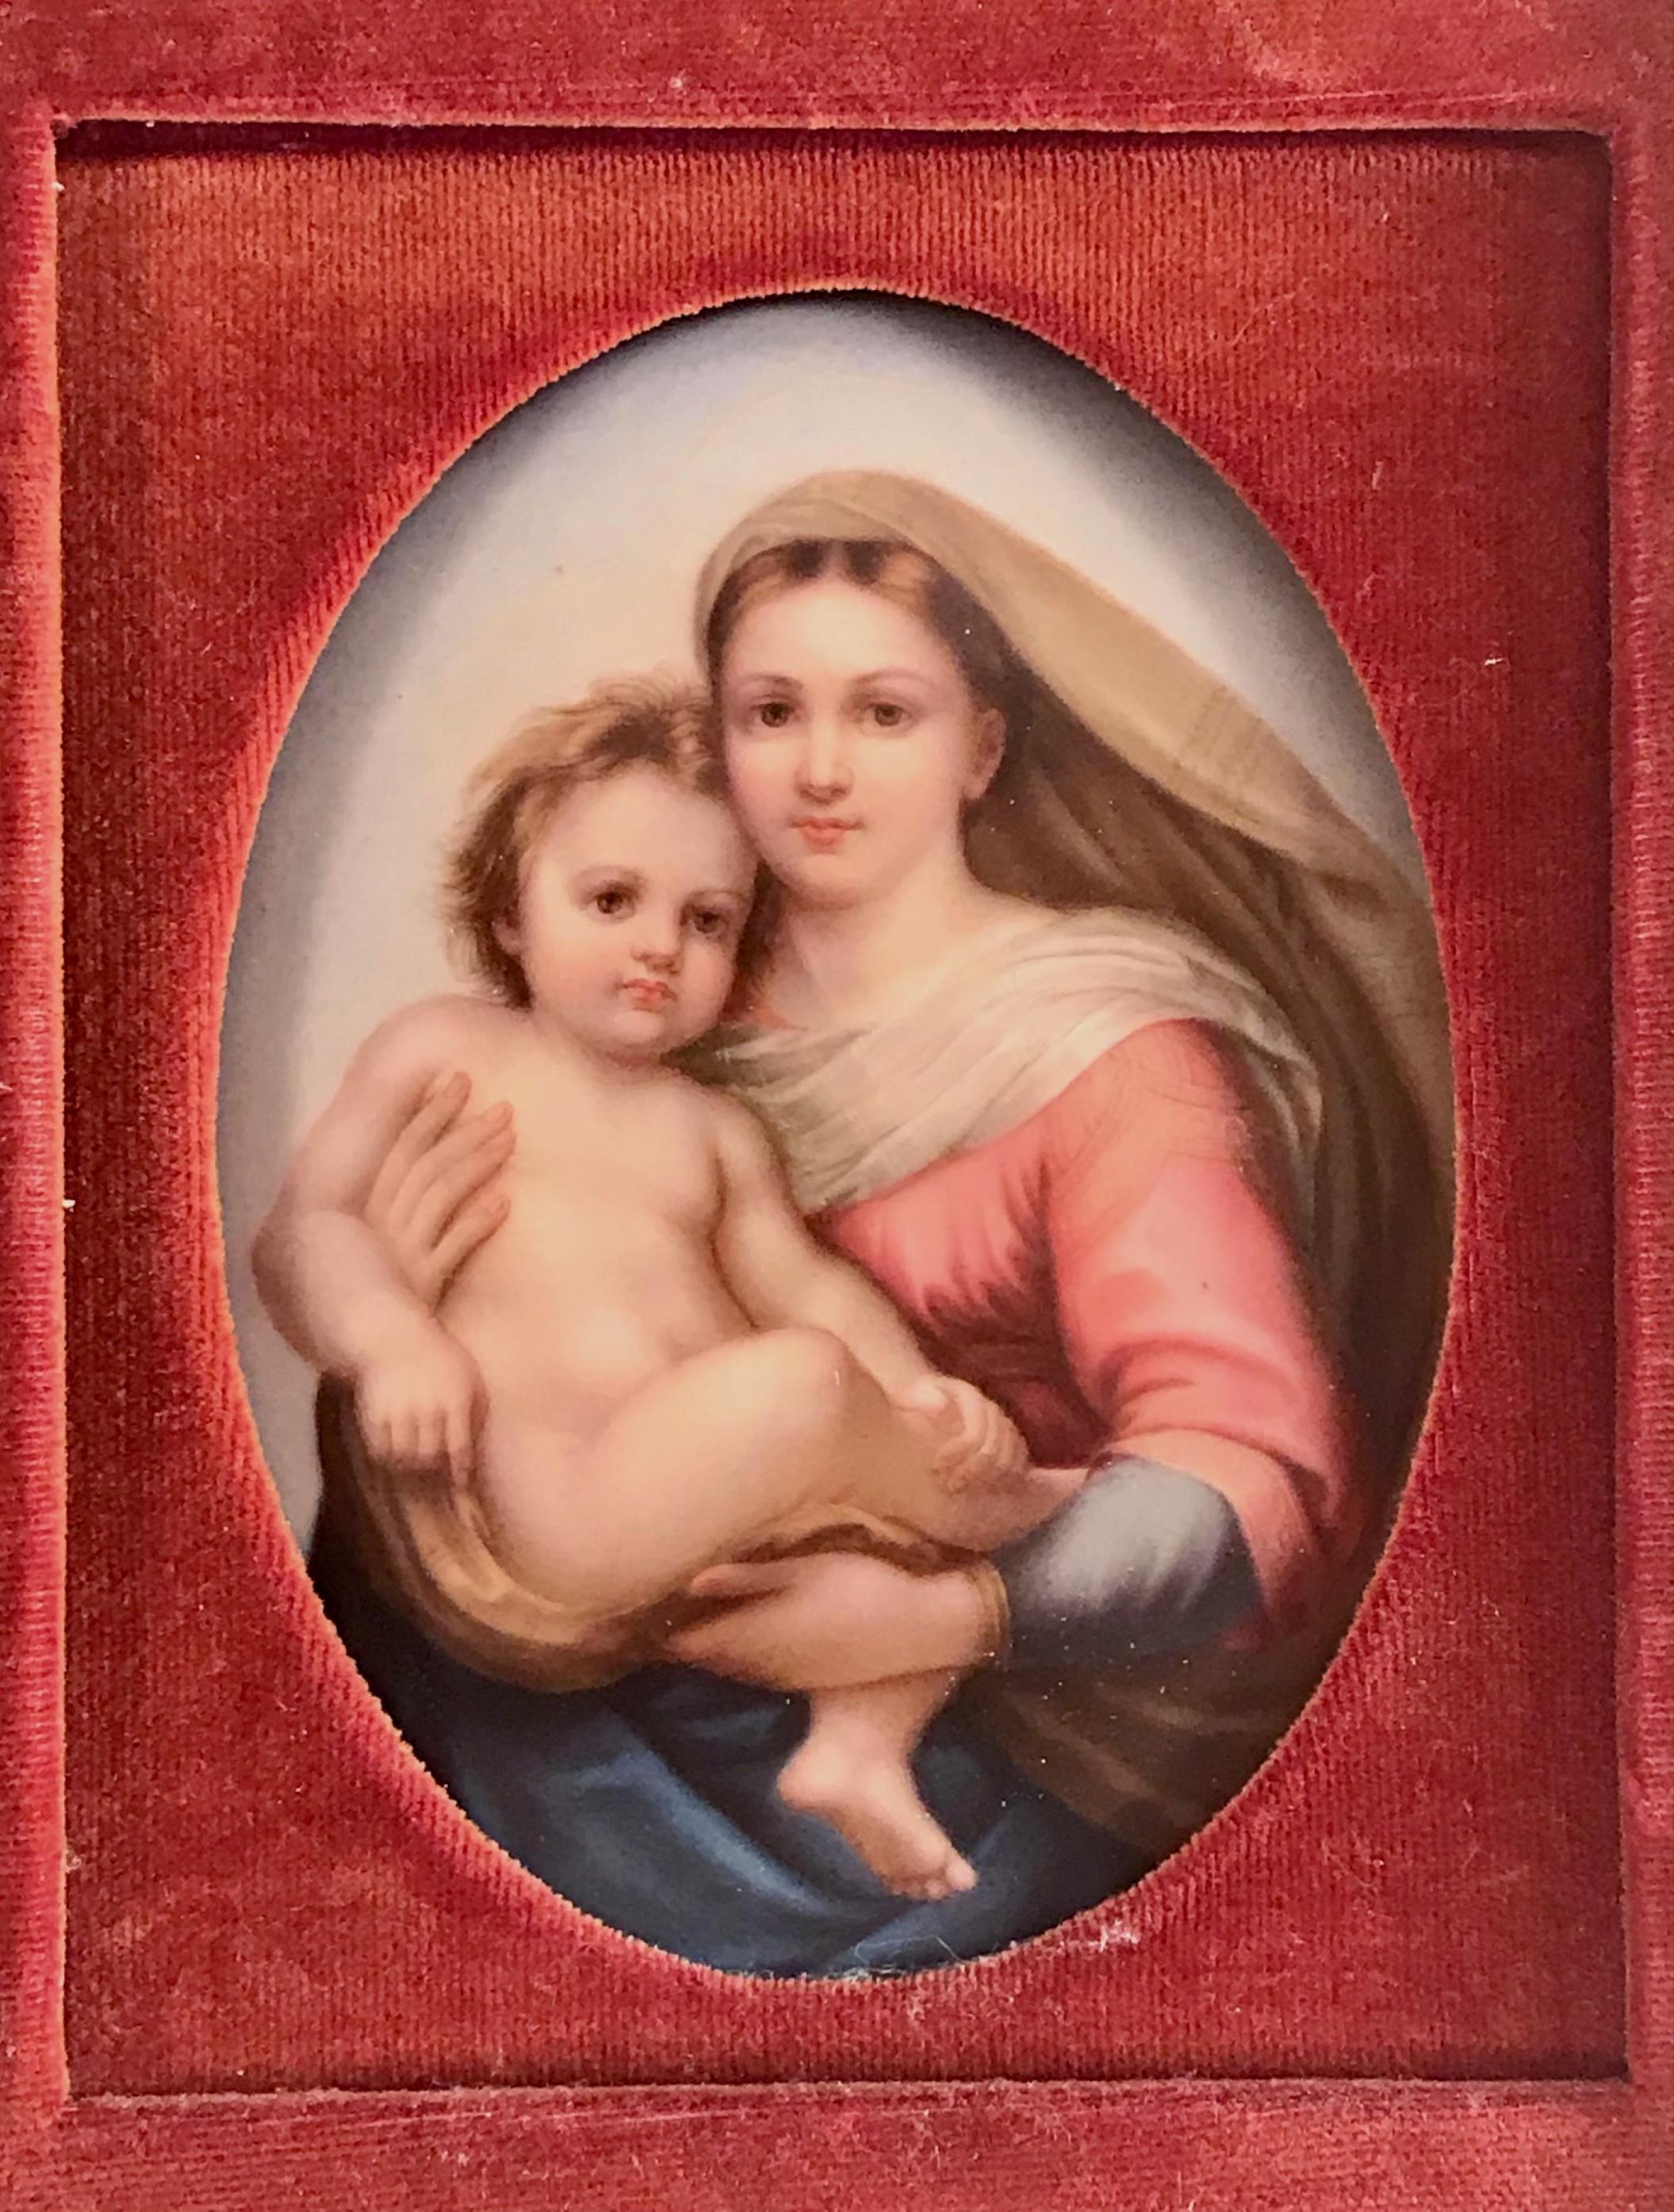 German Porcelain miniature portrait KPM style Madonna and Child after Raphael

German porcelain hand painted plaque of Madonna and Child after Raphael. This 19th century oval miniature portrait is housed in a giltwood frame with red velvet